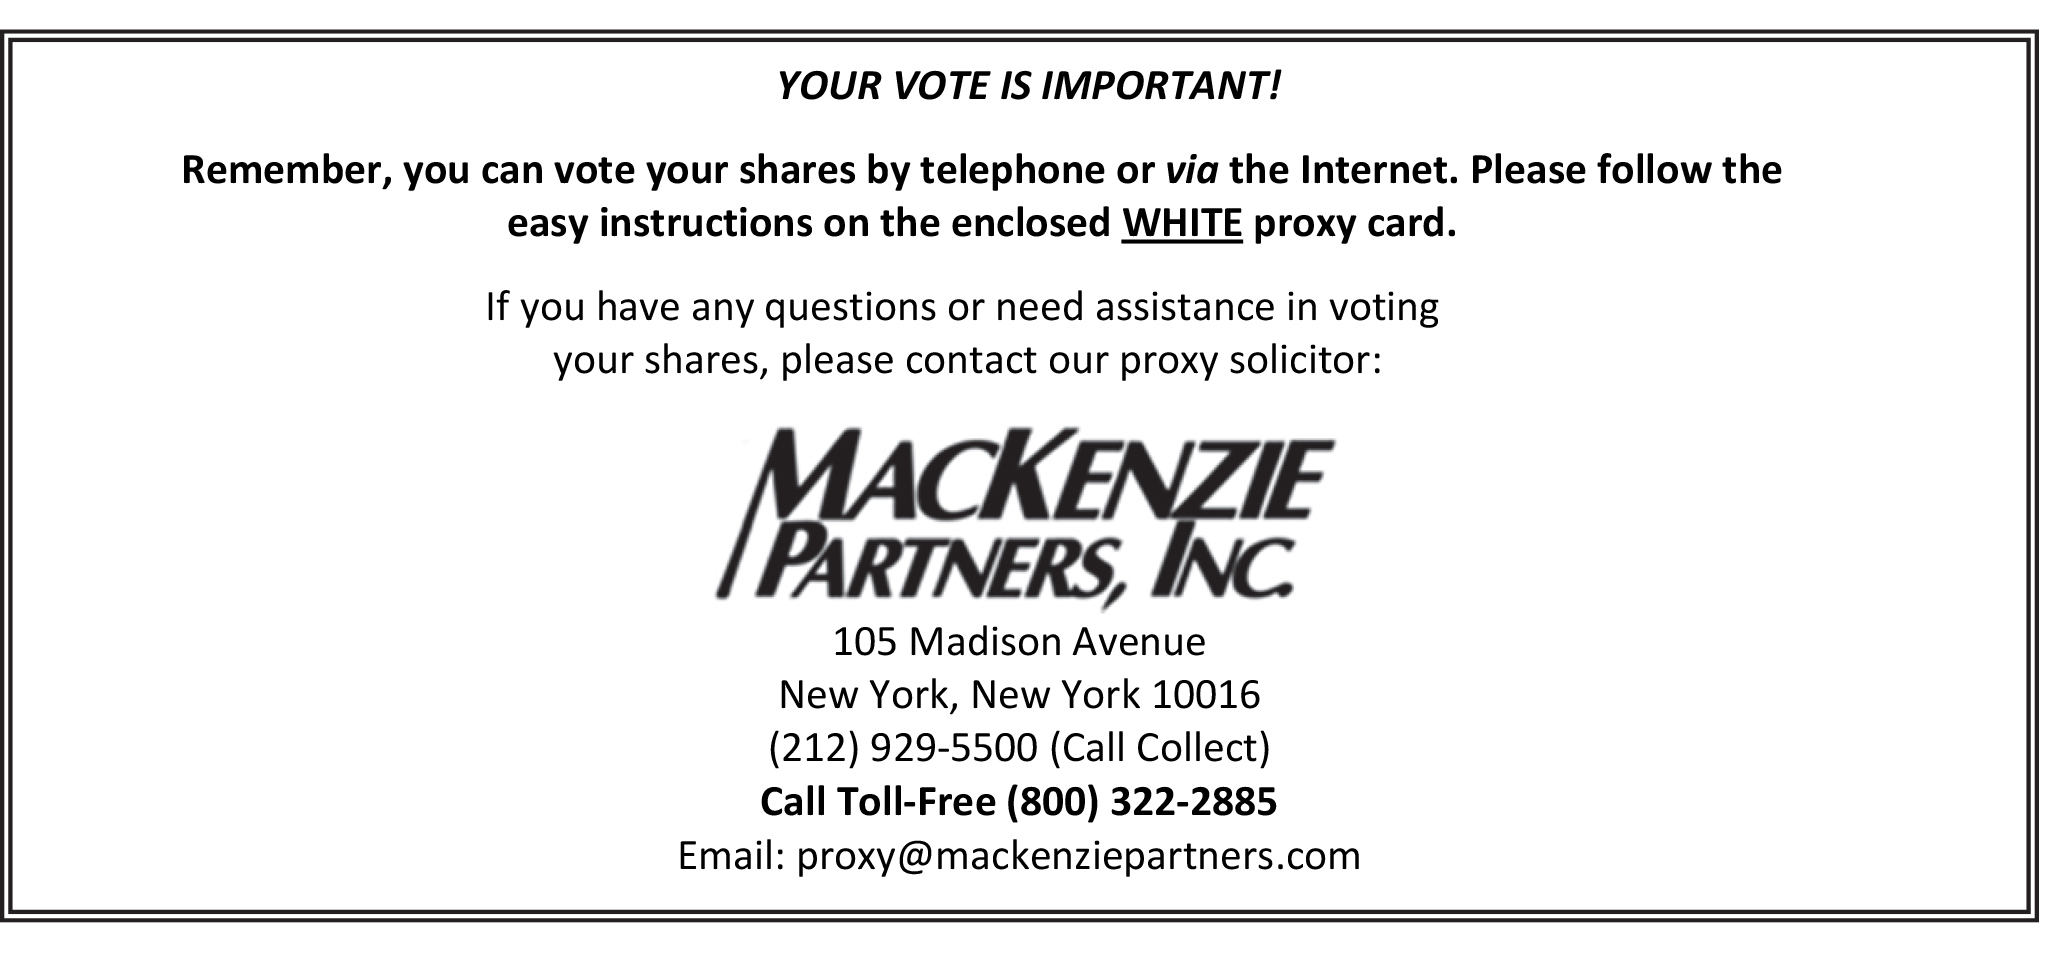 Text Box: YOUR VOTE IS IMPORTANT!

Remember, you can vote your shares by telephone or via the Internet. Please follow the easy instructions on the enclosed WHITE proxy card.

If you have any questions or need assistance in voting
 your shares, please contact our proxy solicitor:

 
105 Madison Avenue
New York, New York 10016
(212) 929-5500 (Call Collect)
Call Toll-Free (800) 322-2885
Email: proxy@mackenziepartners.com 
